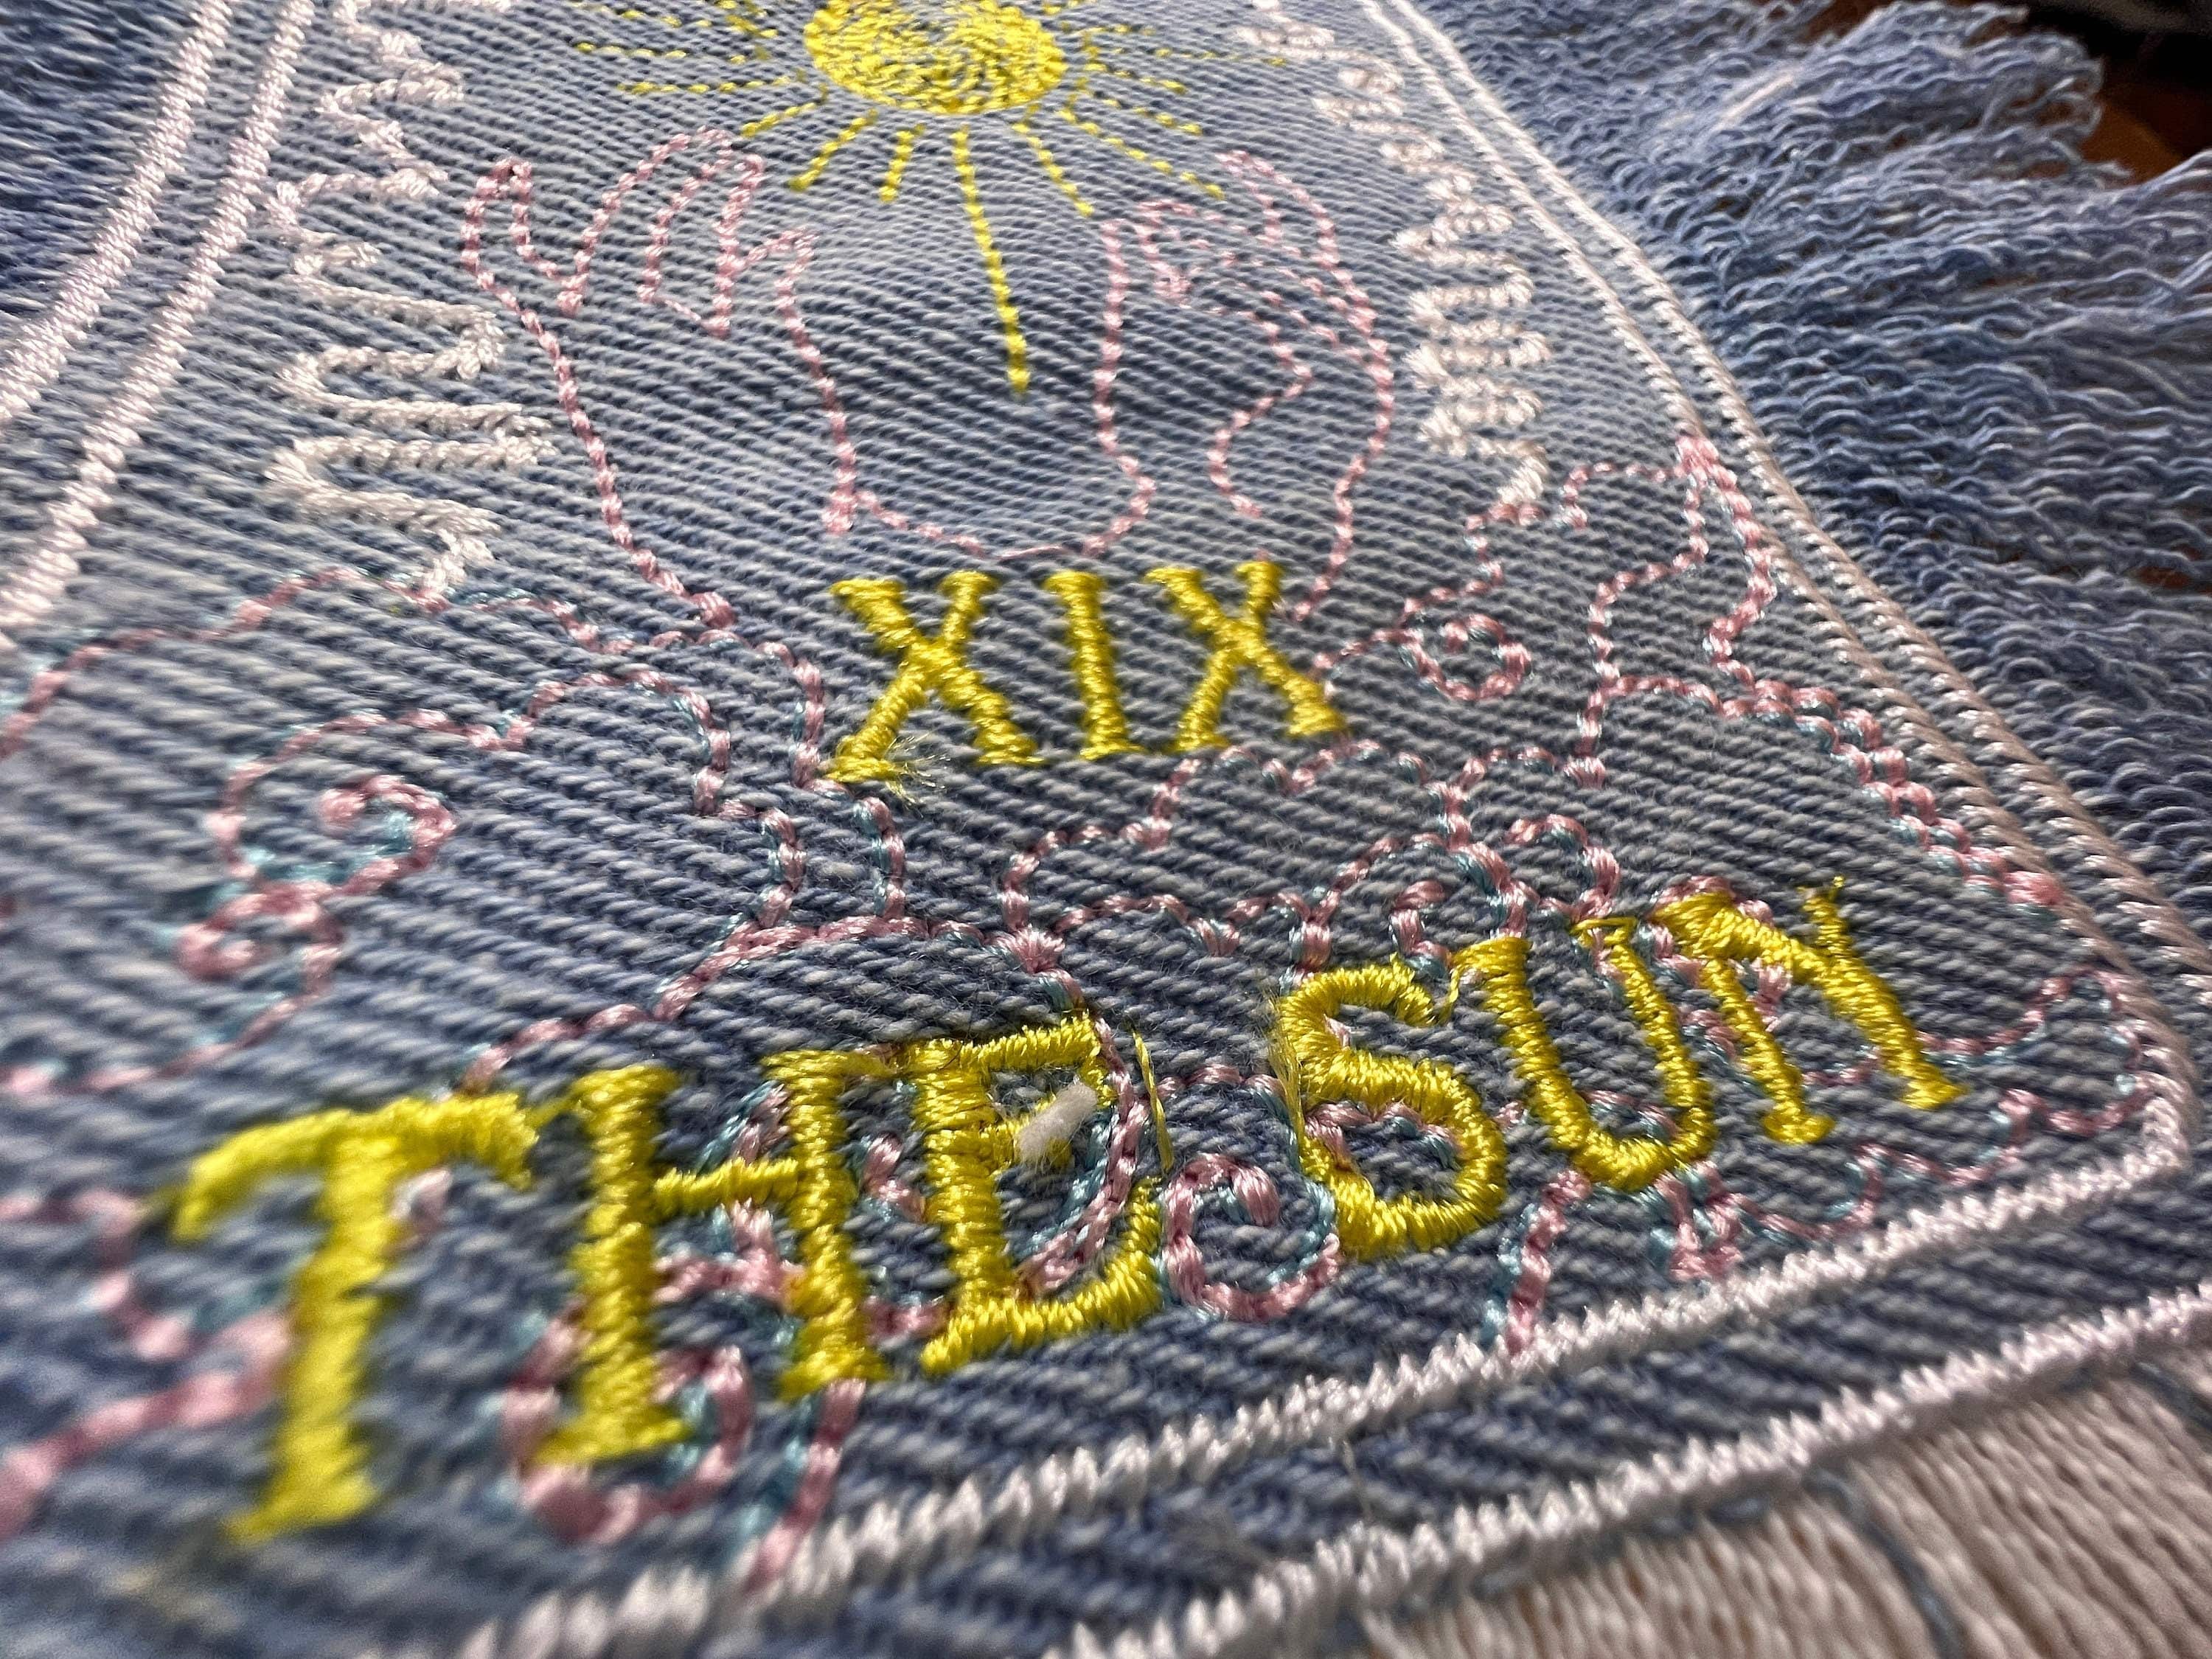 THE SUN TAROT fringed 6 X 4 Bleached Light Denim Patch Sew Iron On Fringe art embroidered Hands Solei Sunshine God Mystic Frayed decal Appliques & Patches